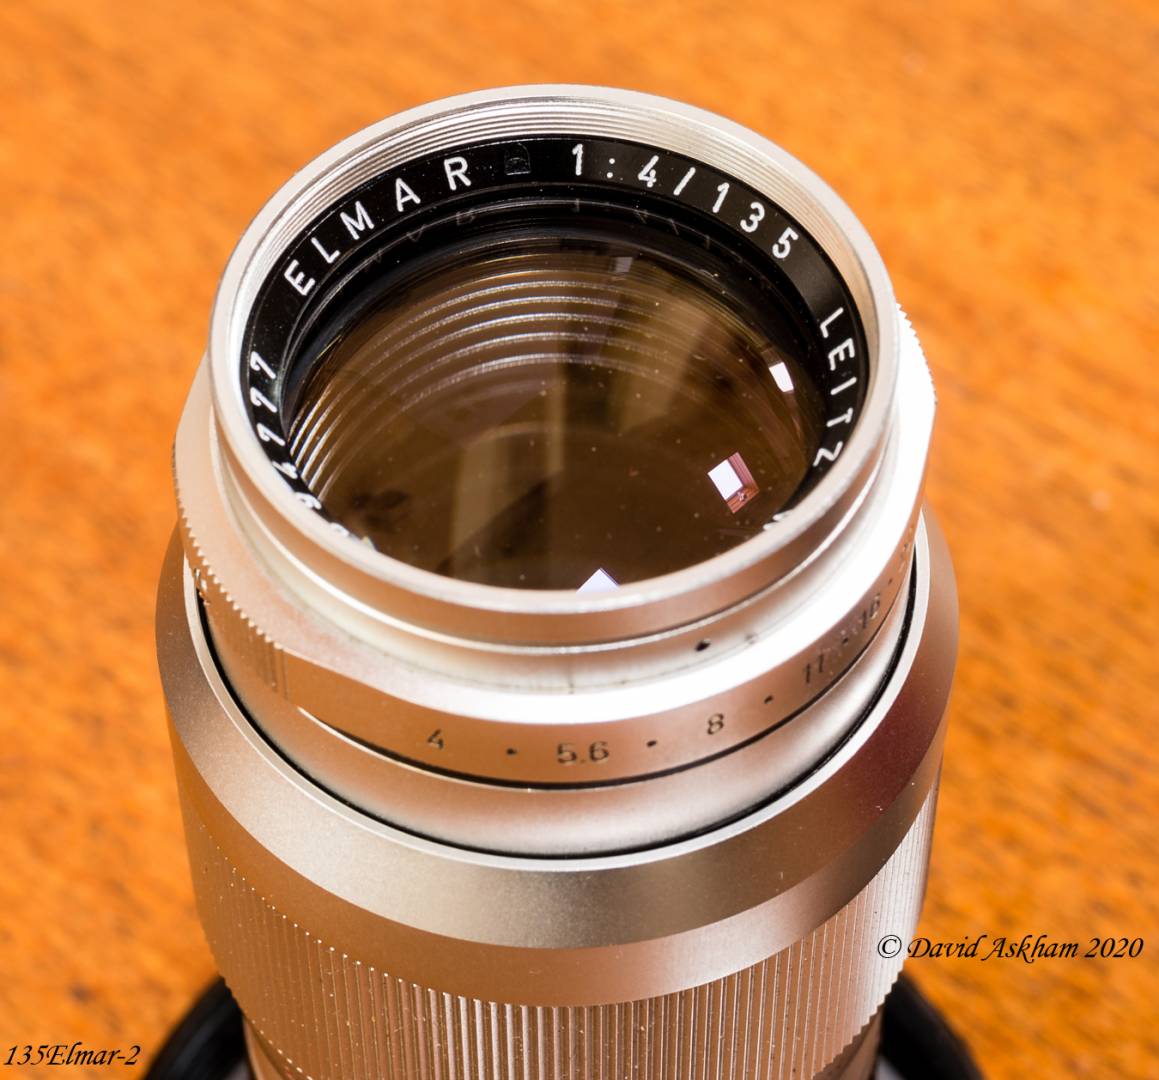 Front end of Leica 135mm f/4 lens (Leica X-Vario)